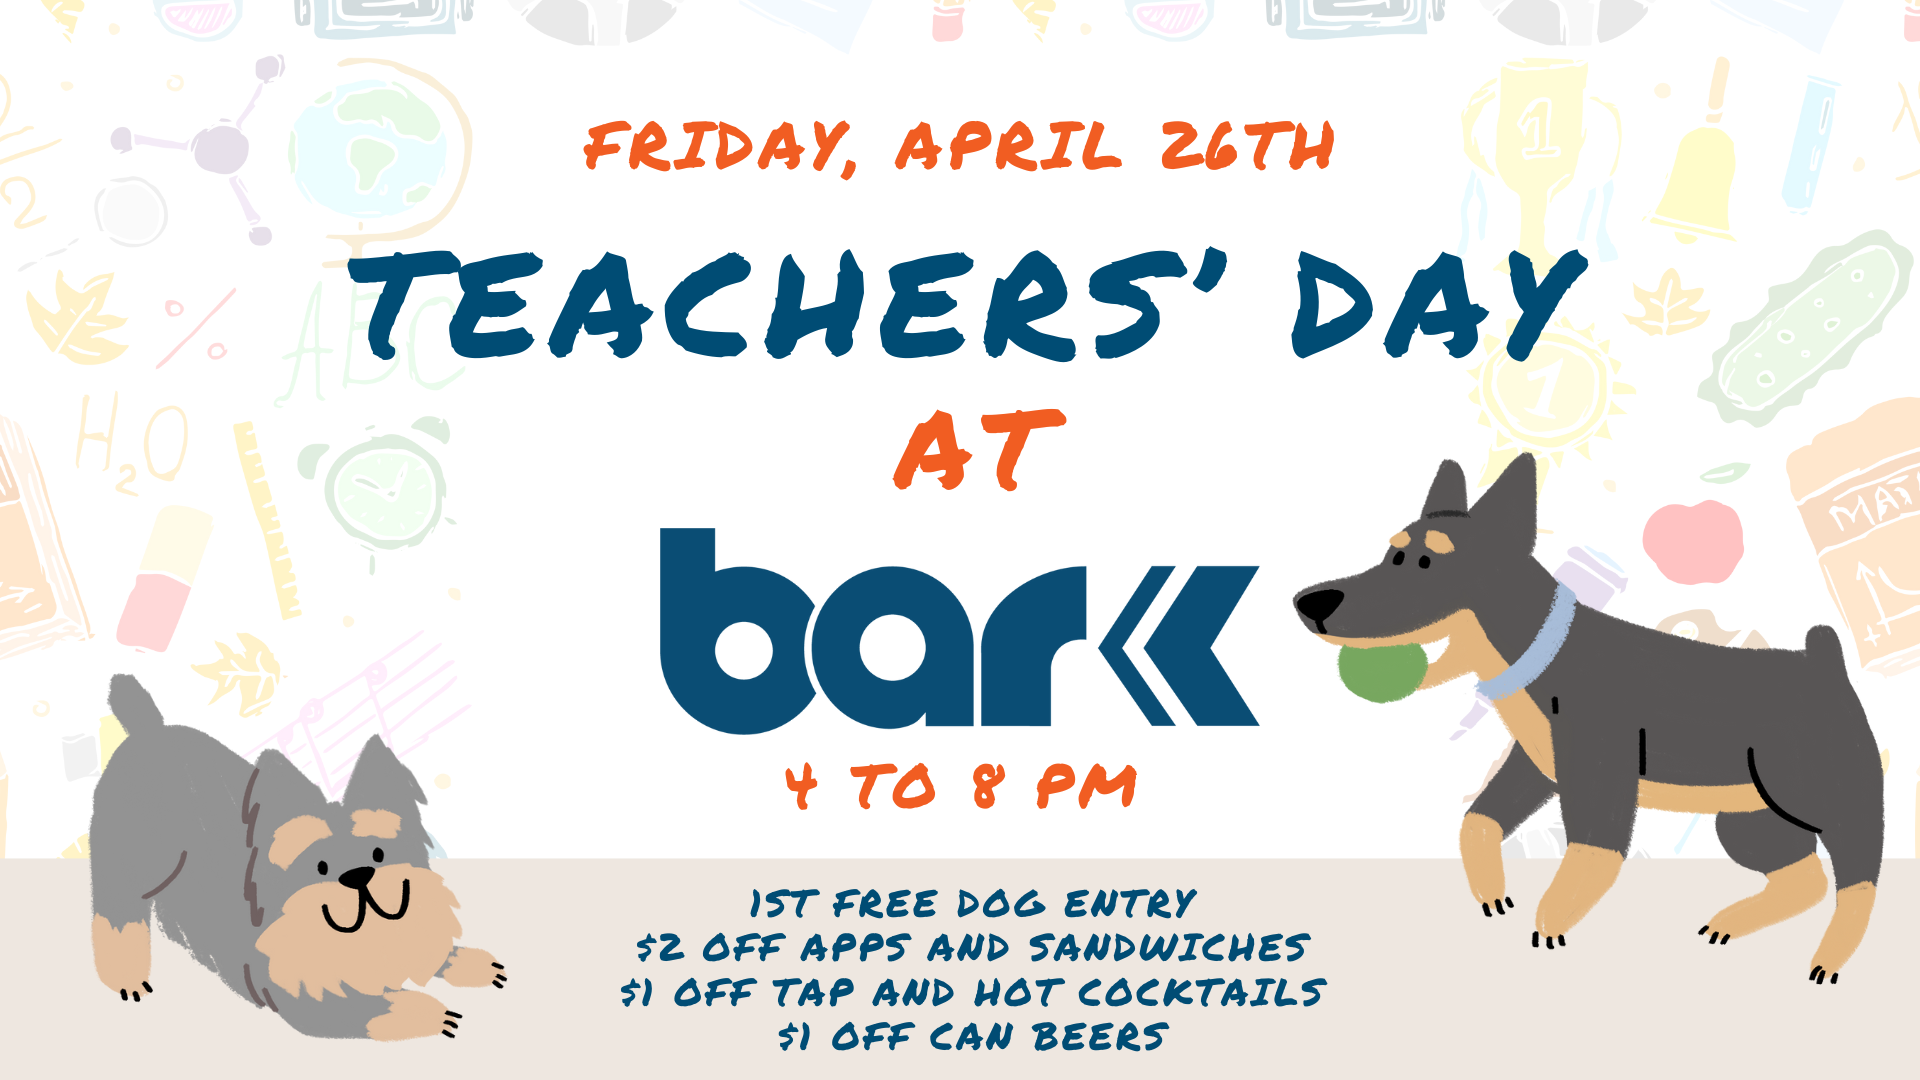 Friday April 26th Teachers' Day at Bar K 4 to 8 pm. 1st free dog entry, $2 off apps and sandwiches, $1 off tap and hot cocktails, $1 off can beers